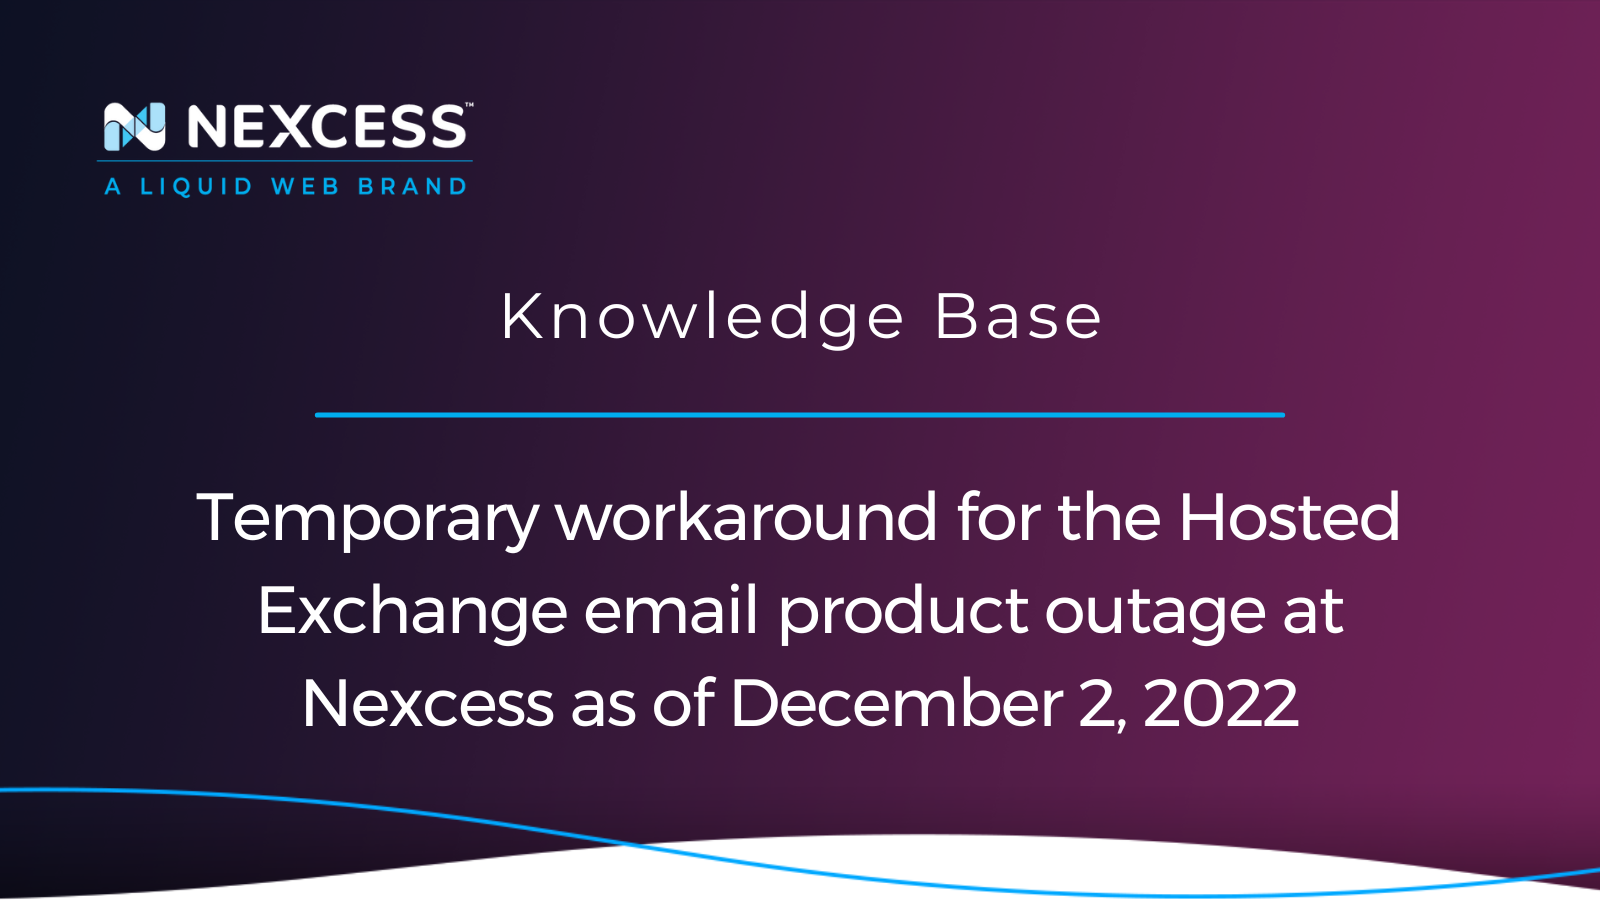 Temporary workaround for the Hosted Exchange email product outage at Nexcess as of December 2, 2022